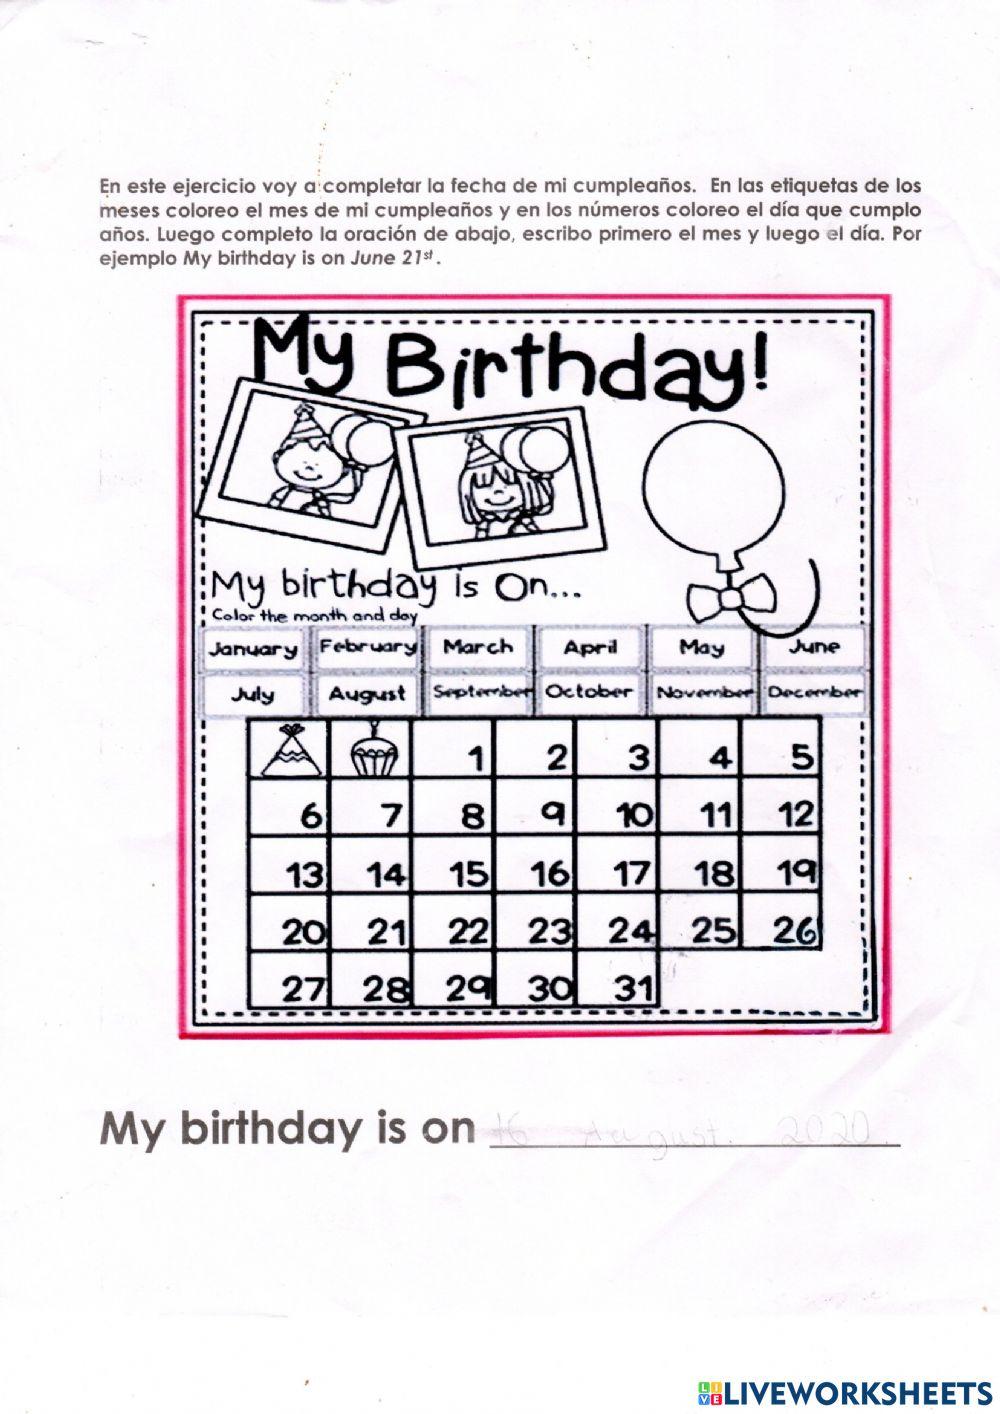 When is your birthday